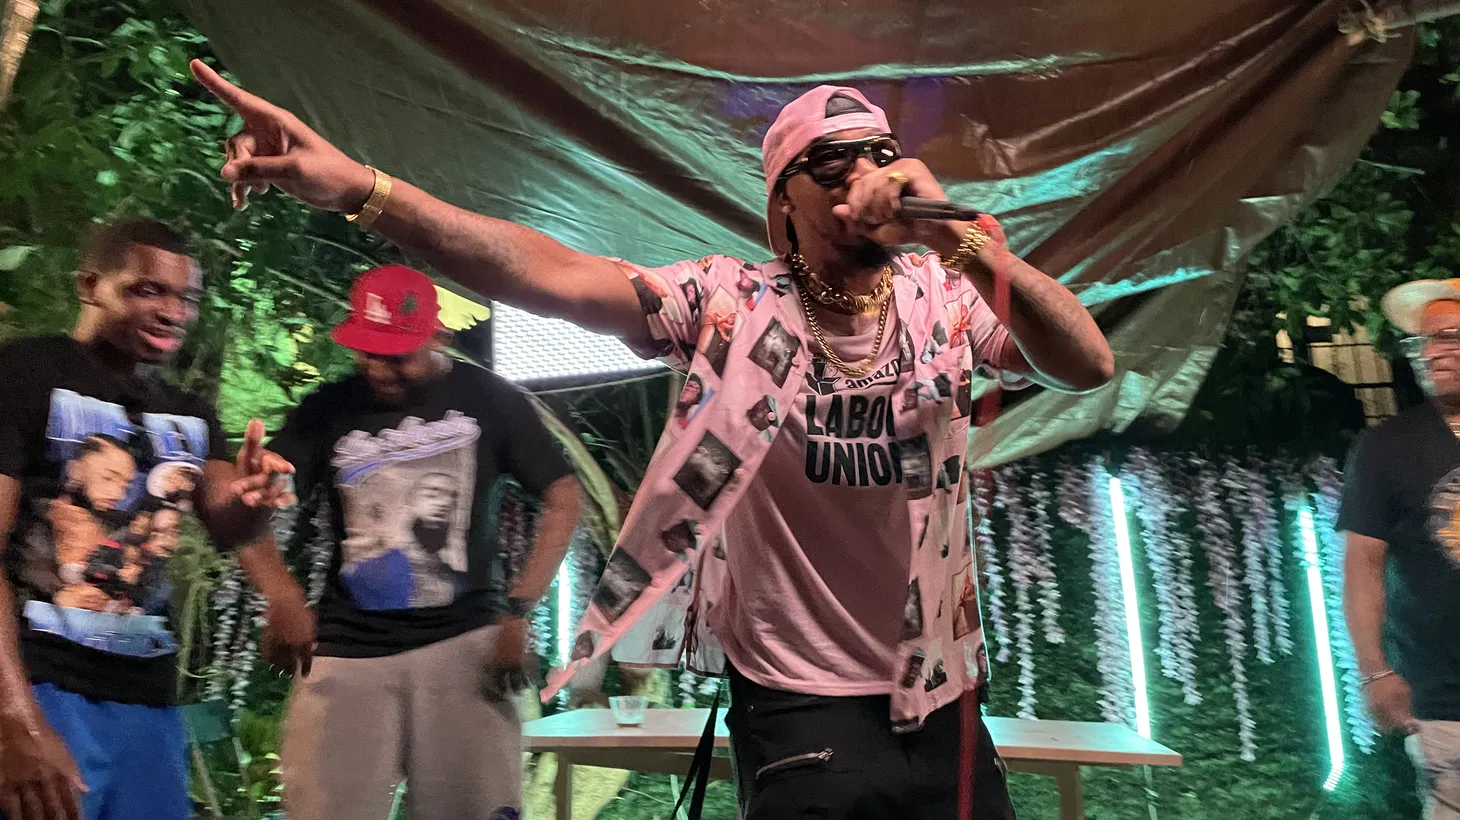 Chris Smalls raps a call-and-response to a young Los Angeles crowd: “Billionaires they gotta go. F**k Jeff Bezos.”